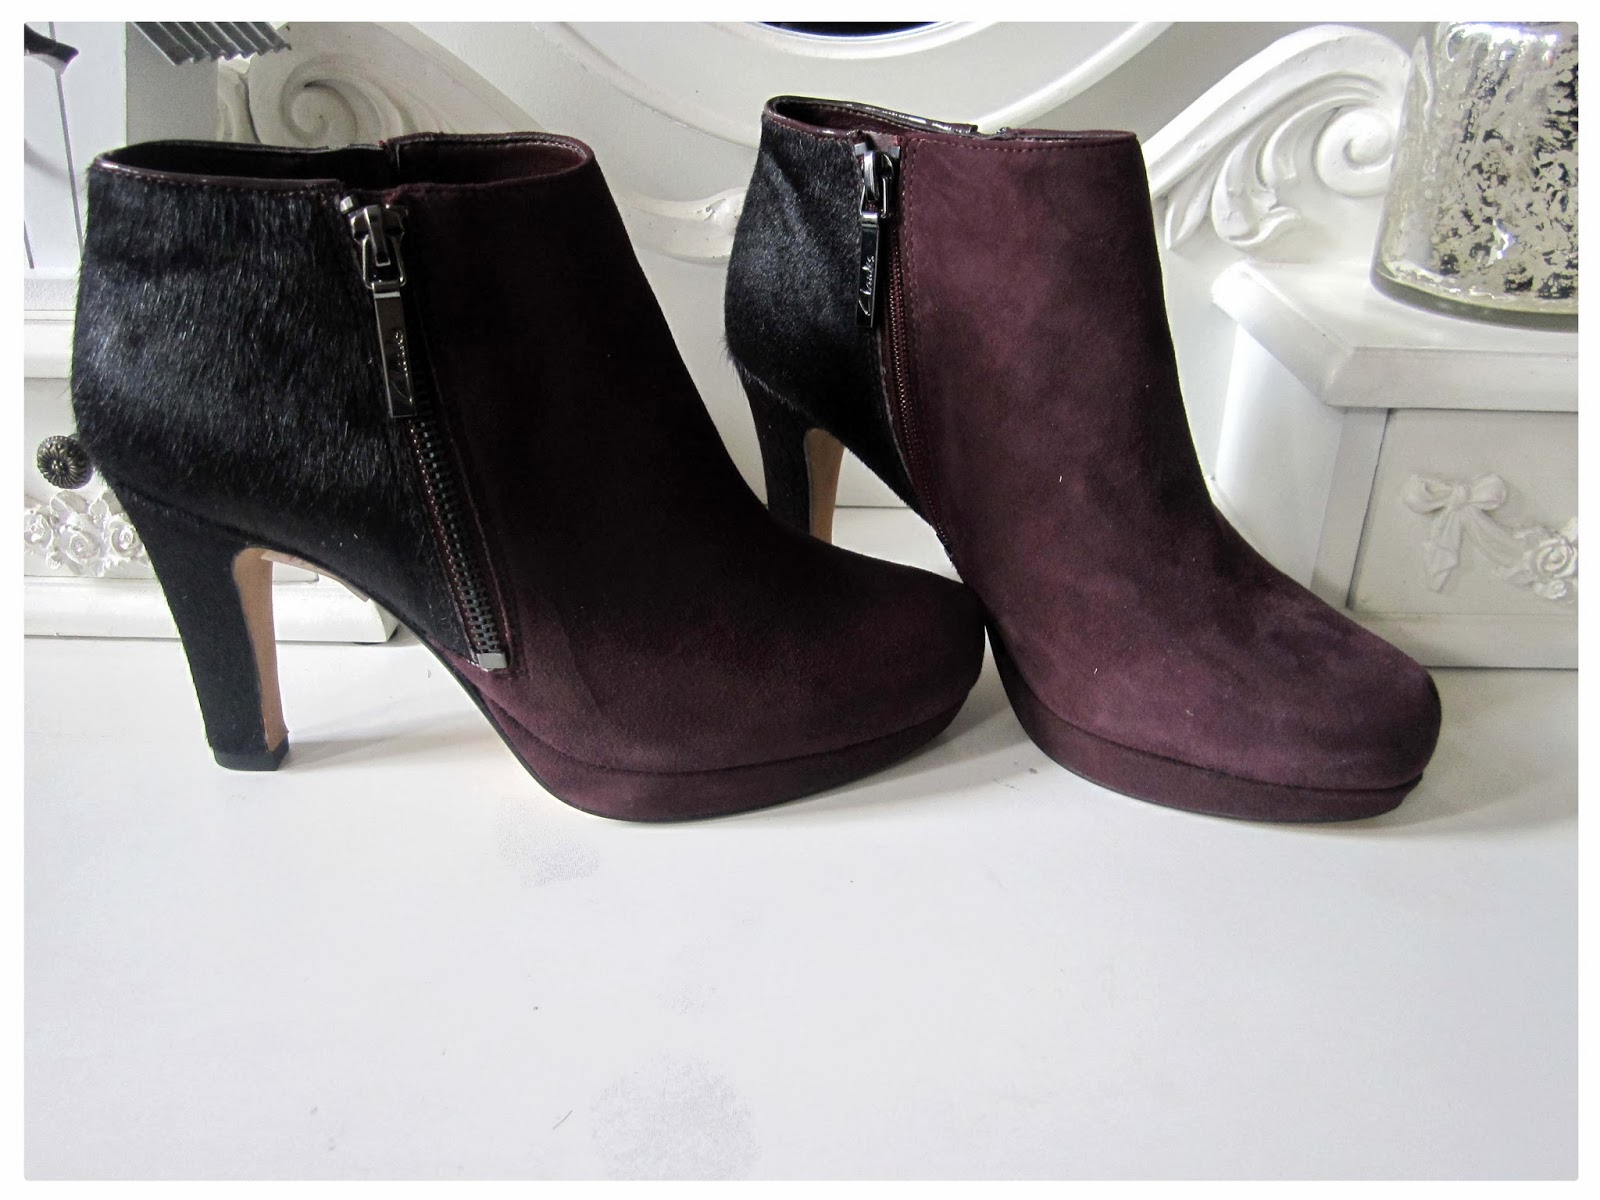 The Ultimate Winter Wine Shoe Boots From Clarks - Slurp Social